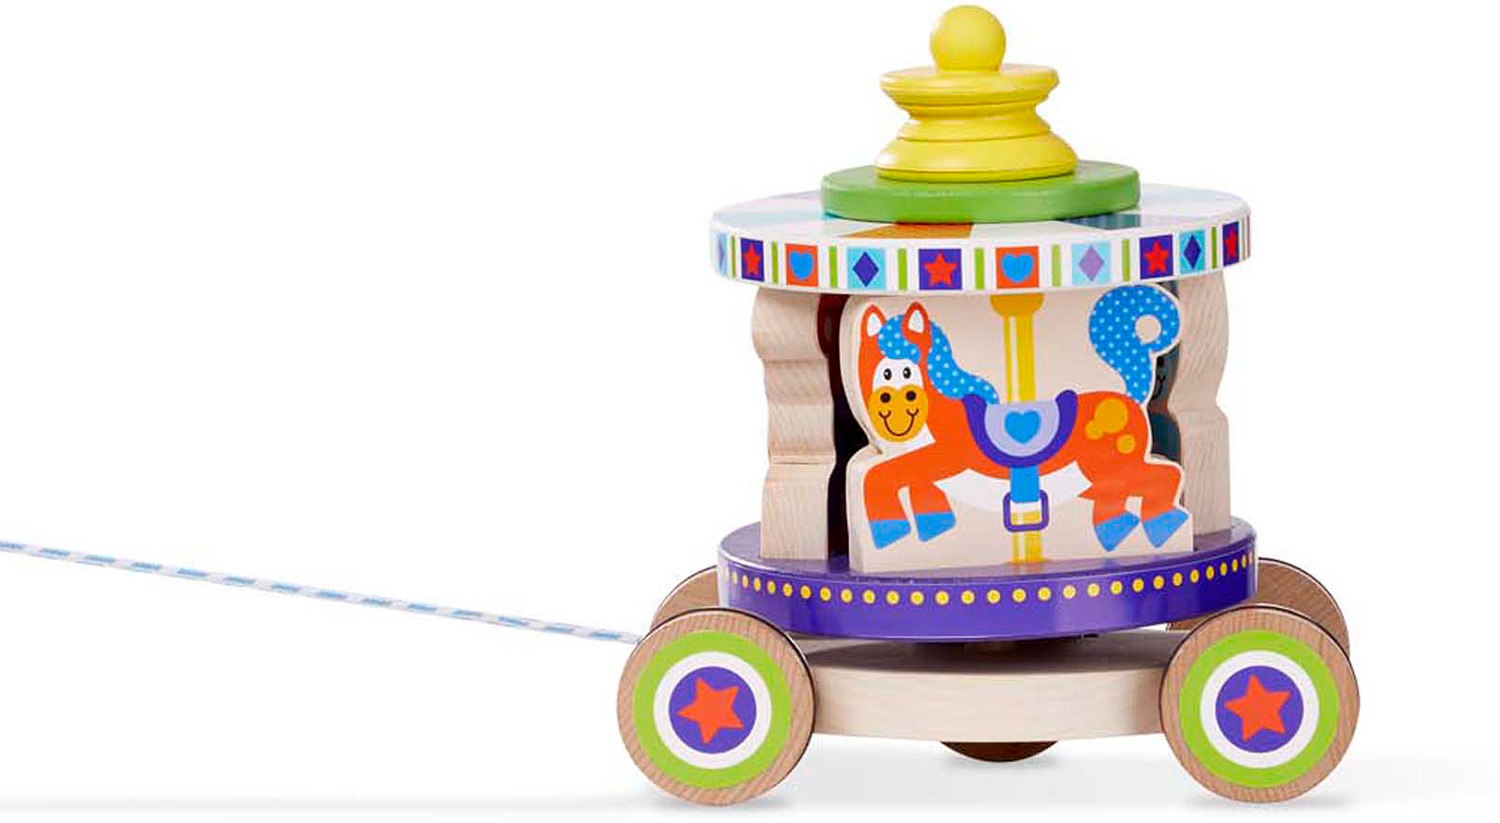 Details about   Melissa & Doug First Play Wooden CAROUSEL PULL TOY Merry Go Round Ponies 13616 